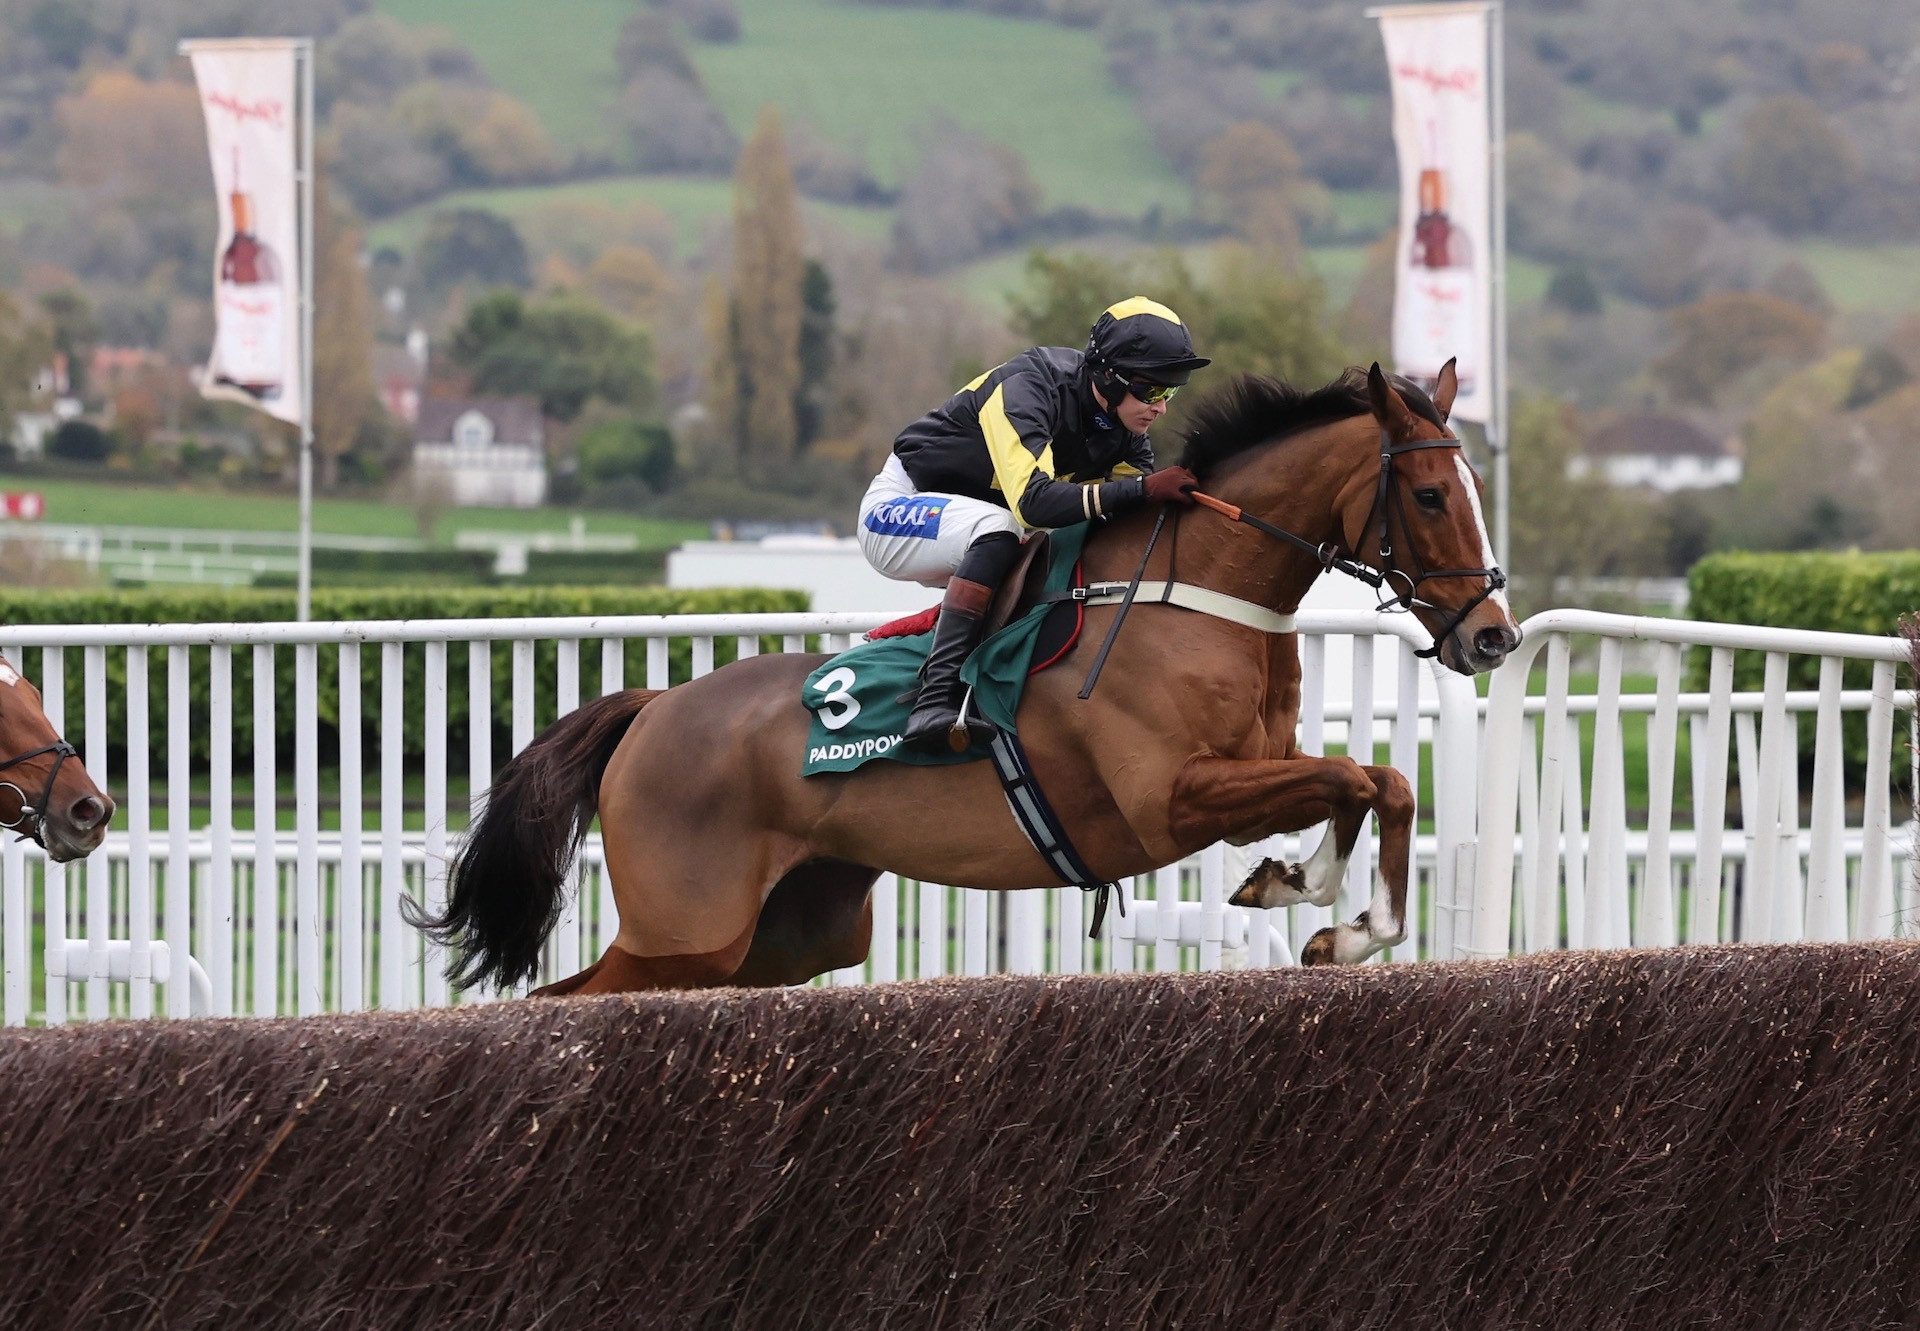 Amarillo Sky (Westerner) Win The Class 2 Paddy Power Handicap Chase At Cheltenham